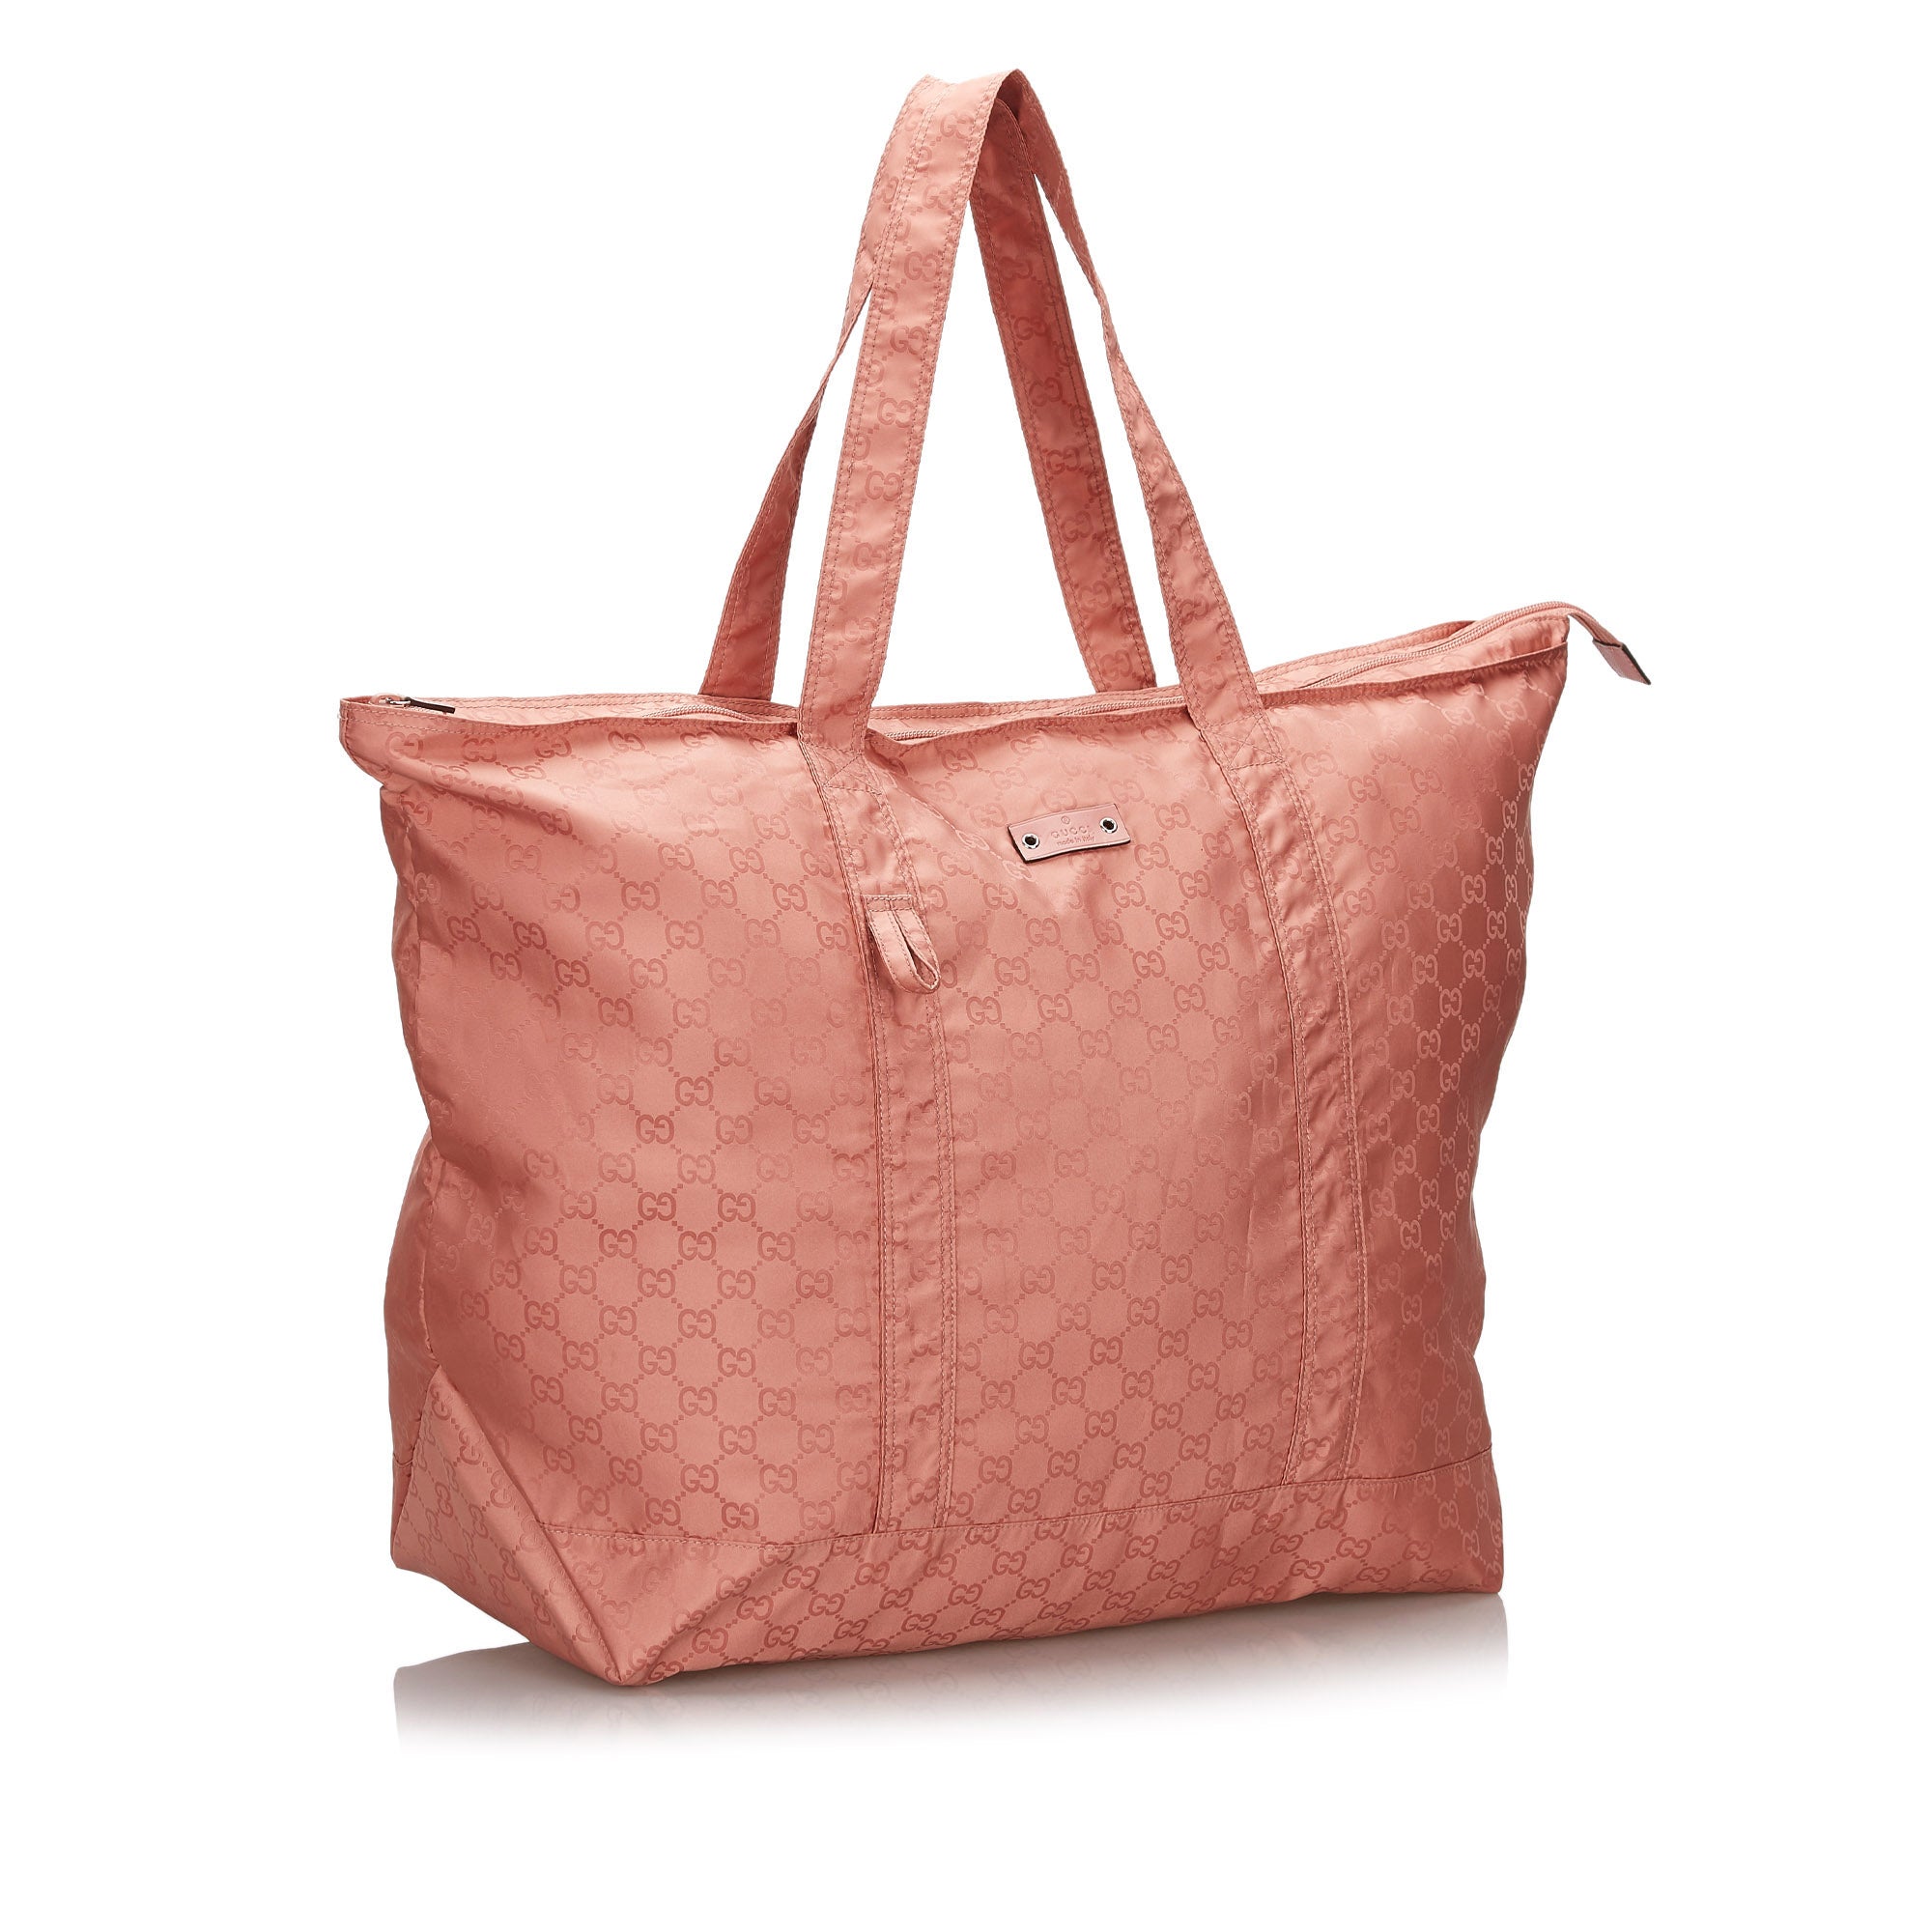 Buy & Consign Authentic Gucci GG Nylon Tote Bag Pink at The Plush Posh